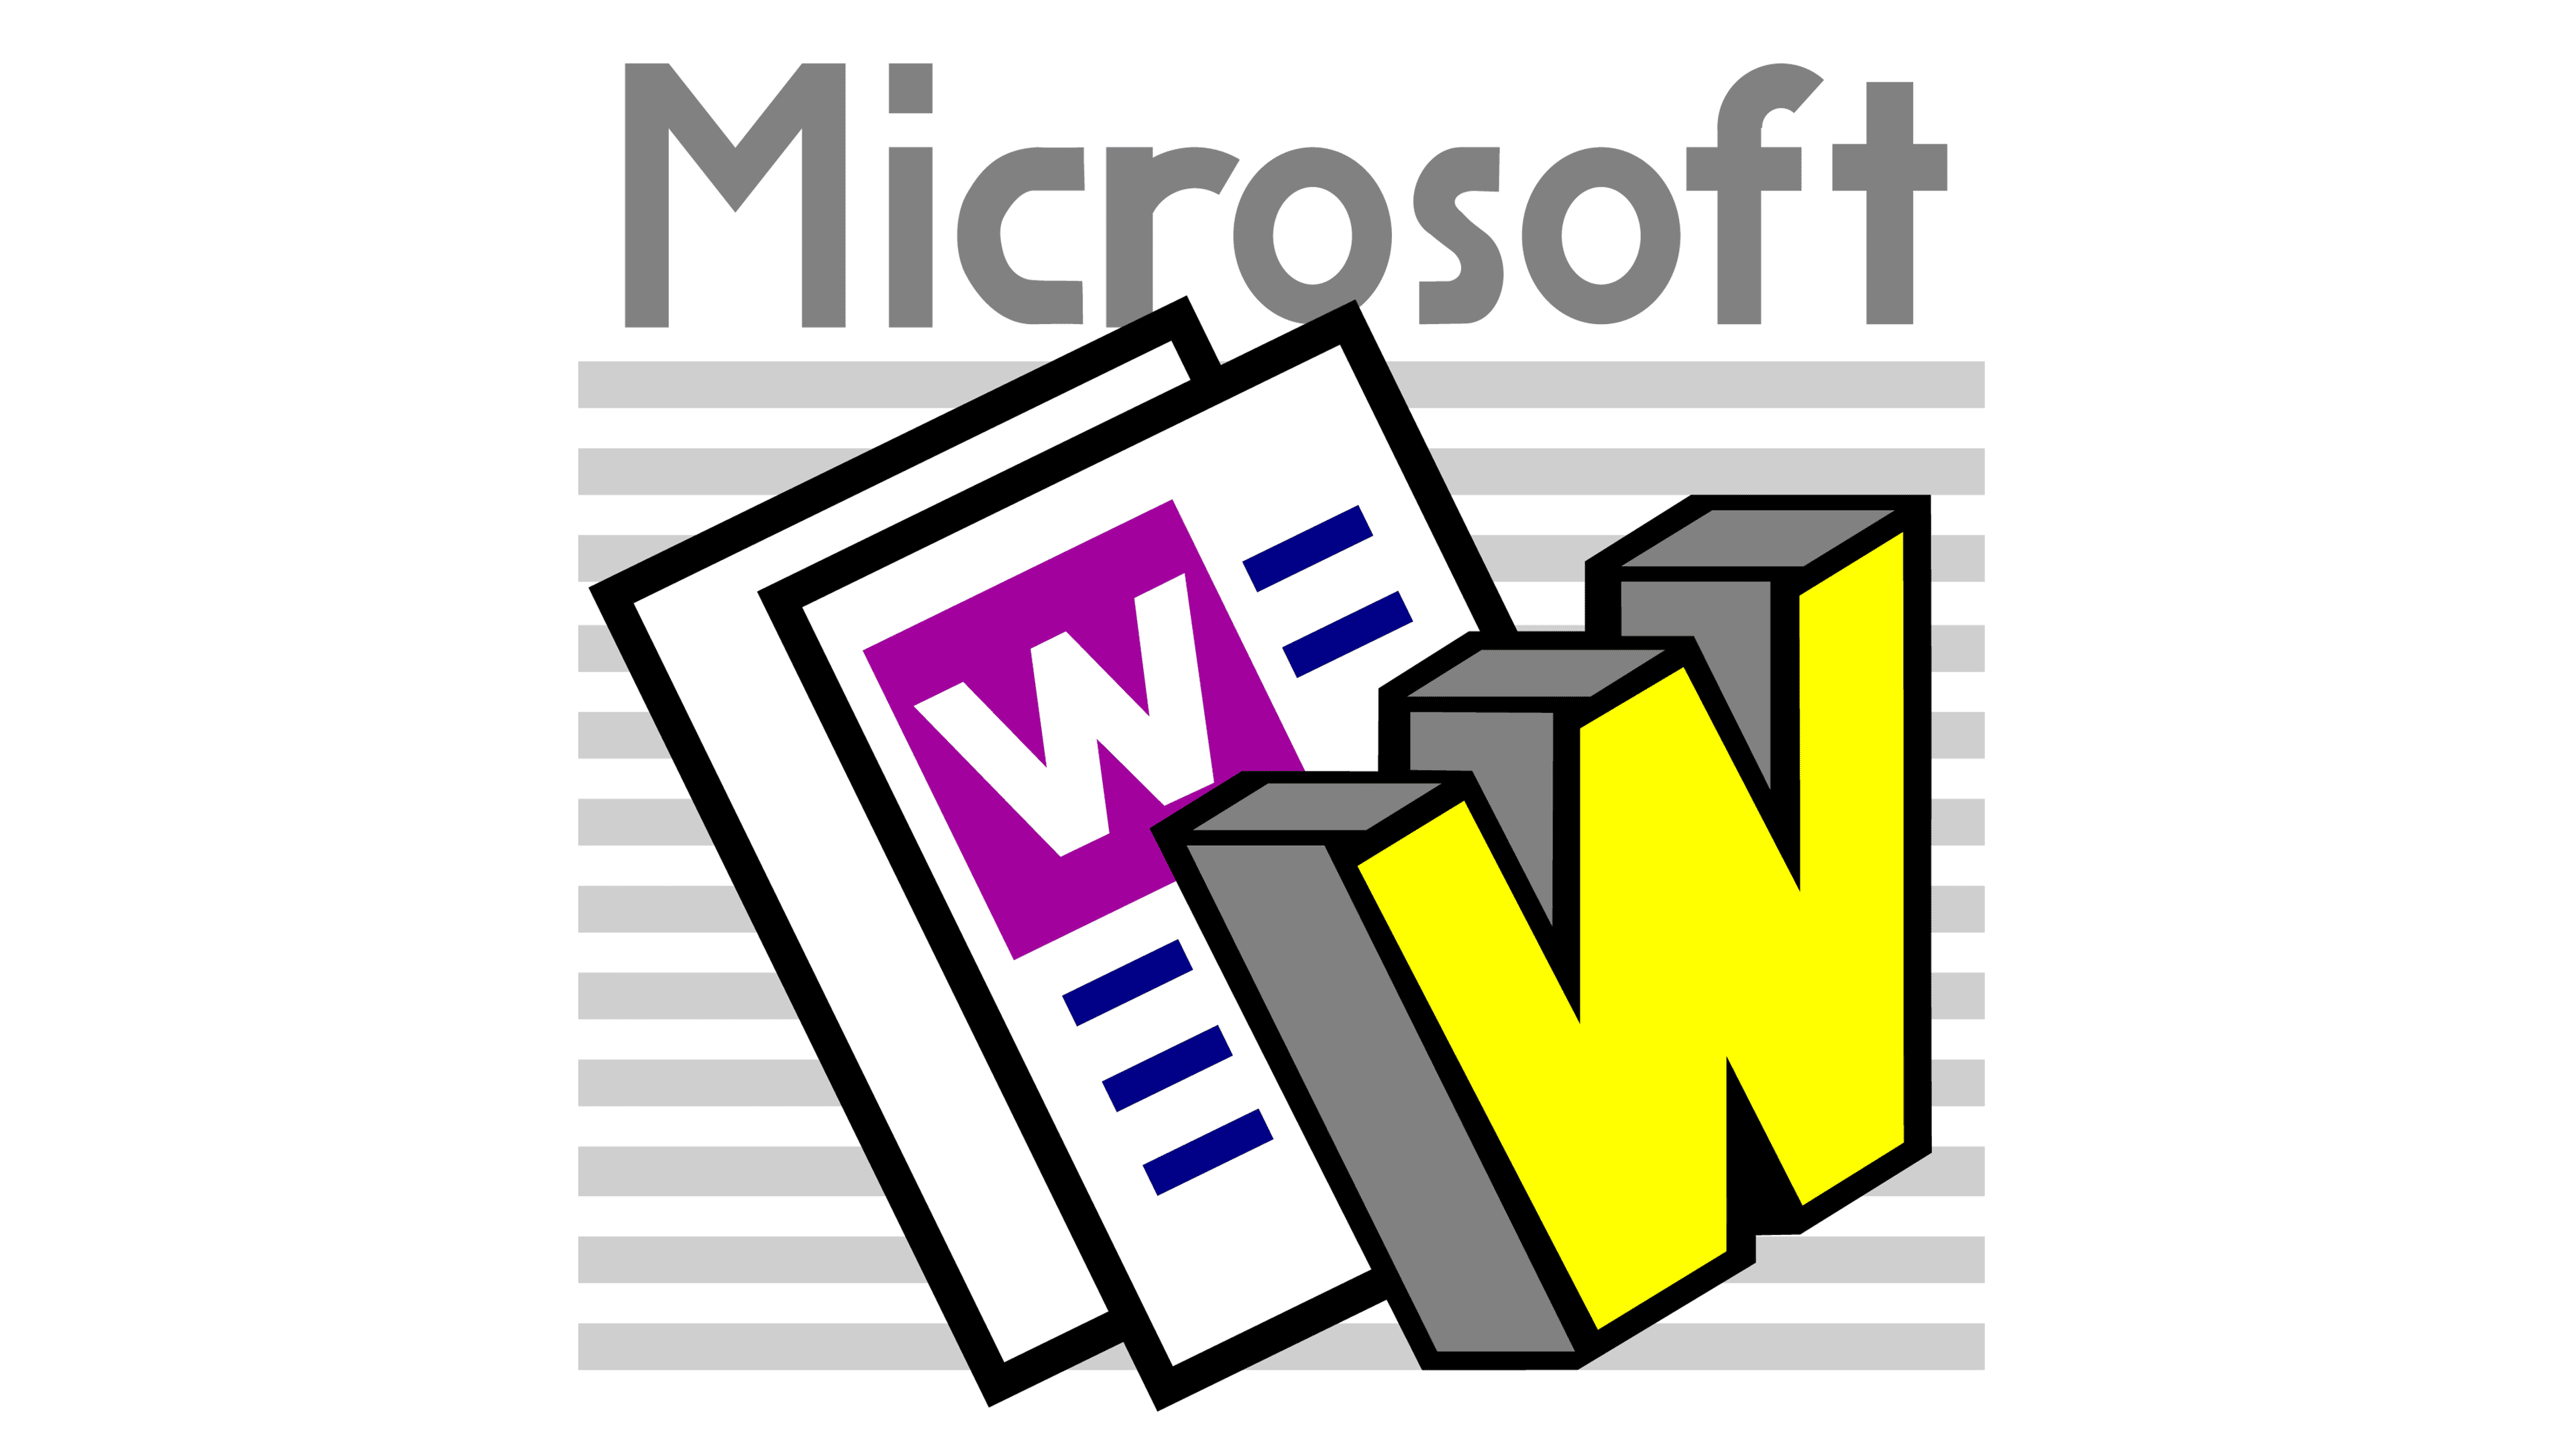 Microsoft Office Word Logo PNG Transparent & SVG Vector - Freebie Supply